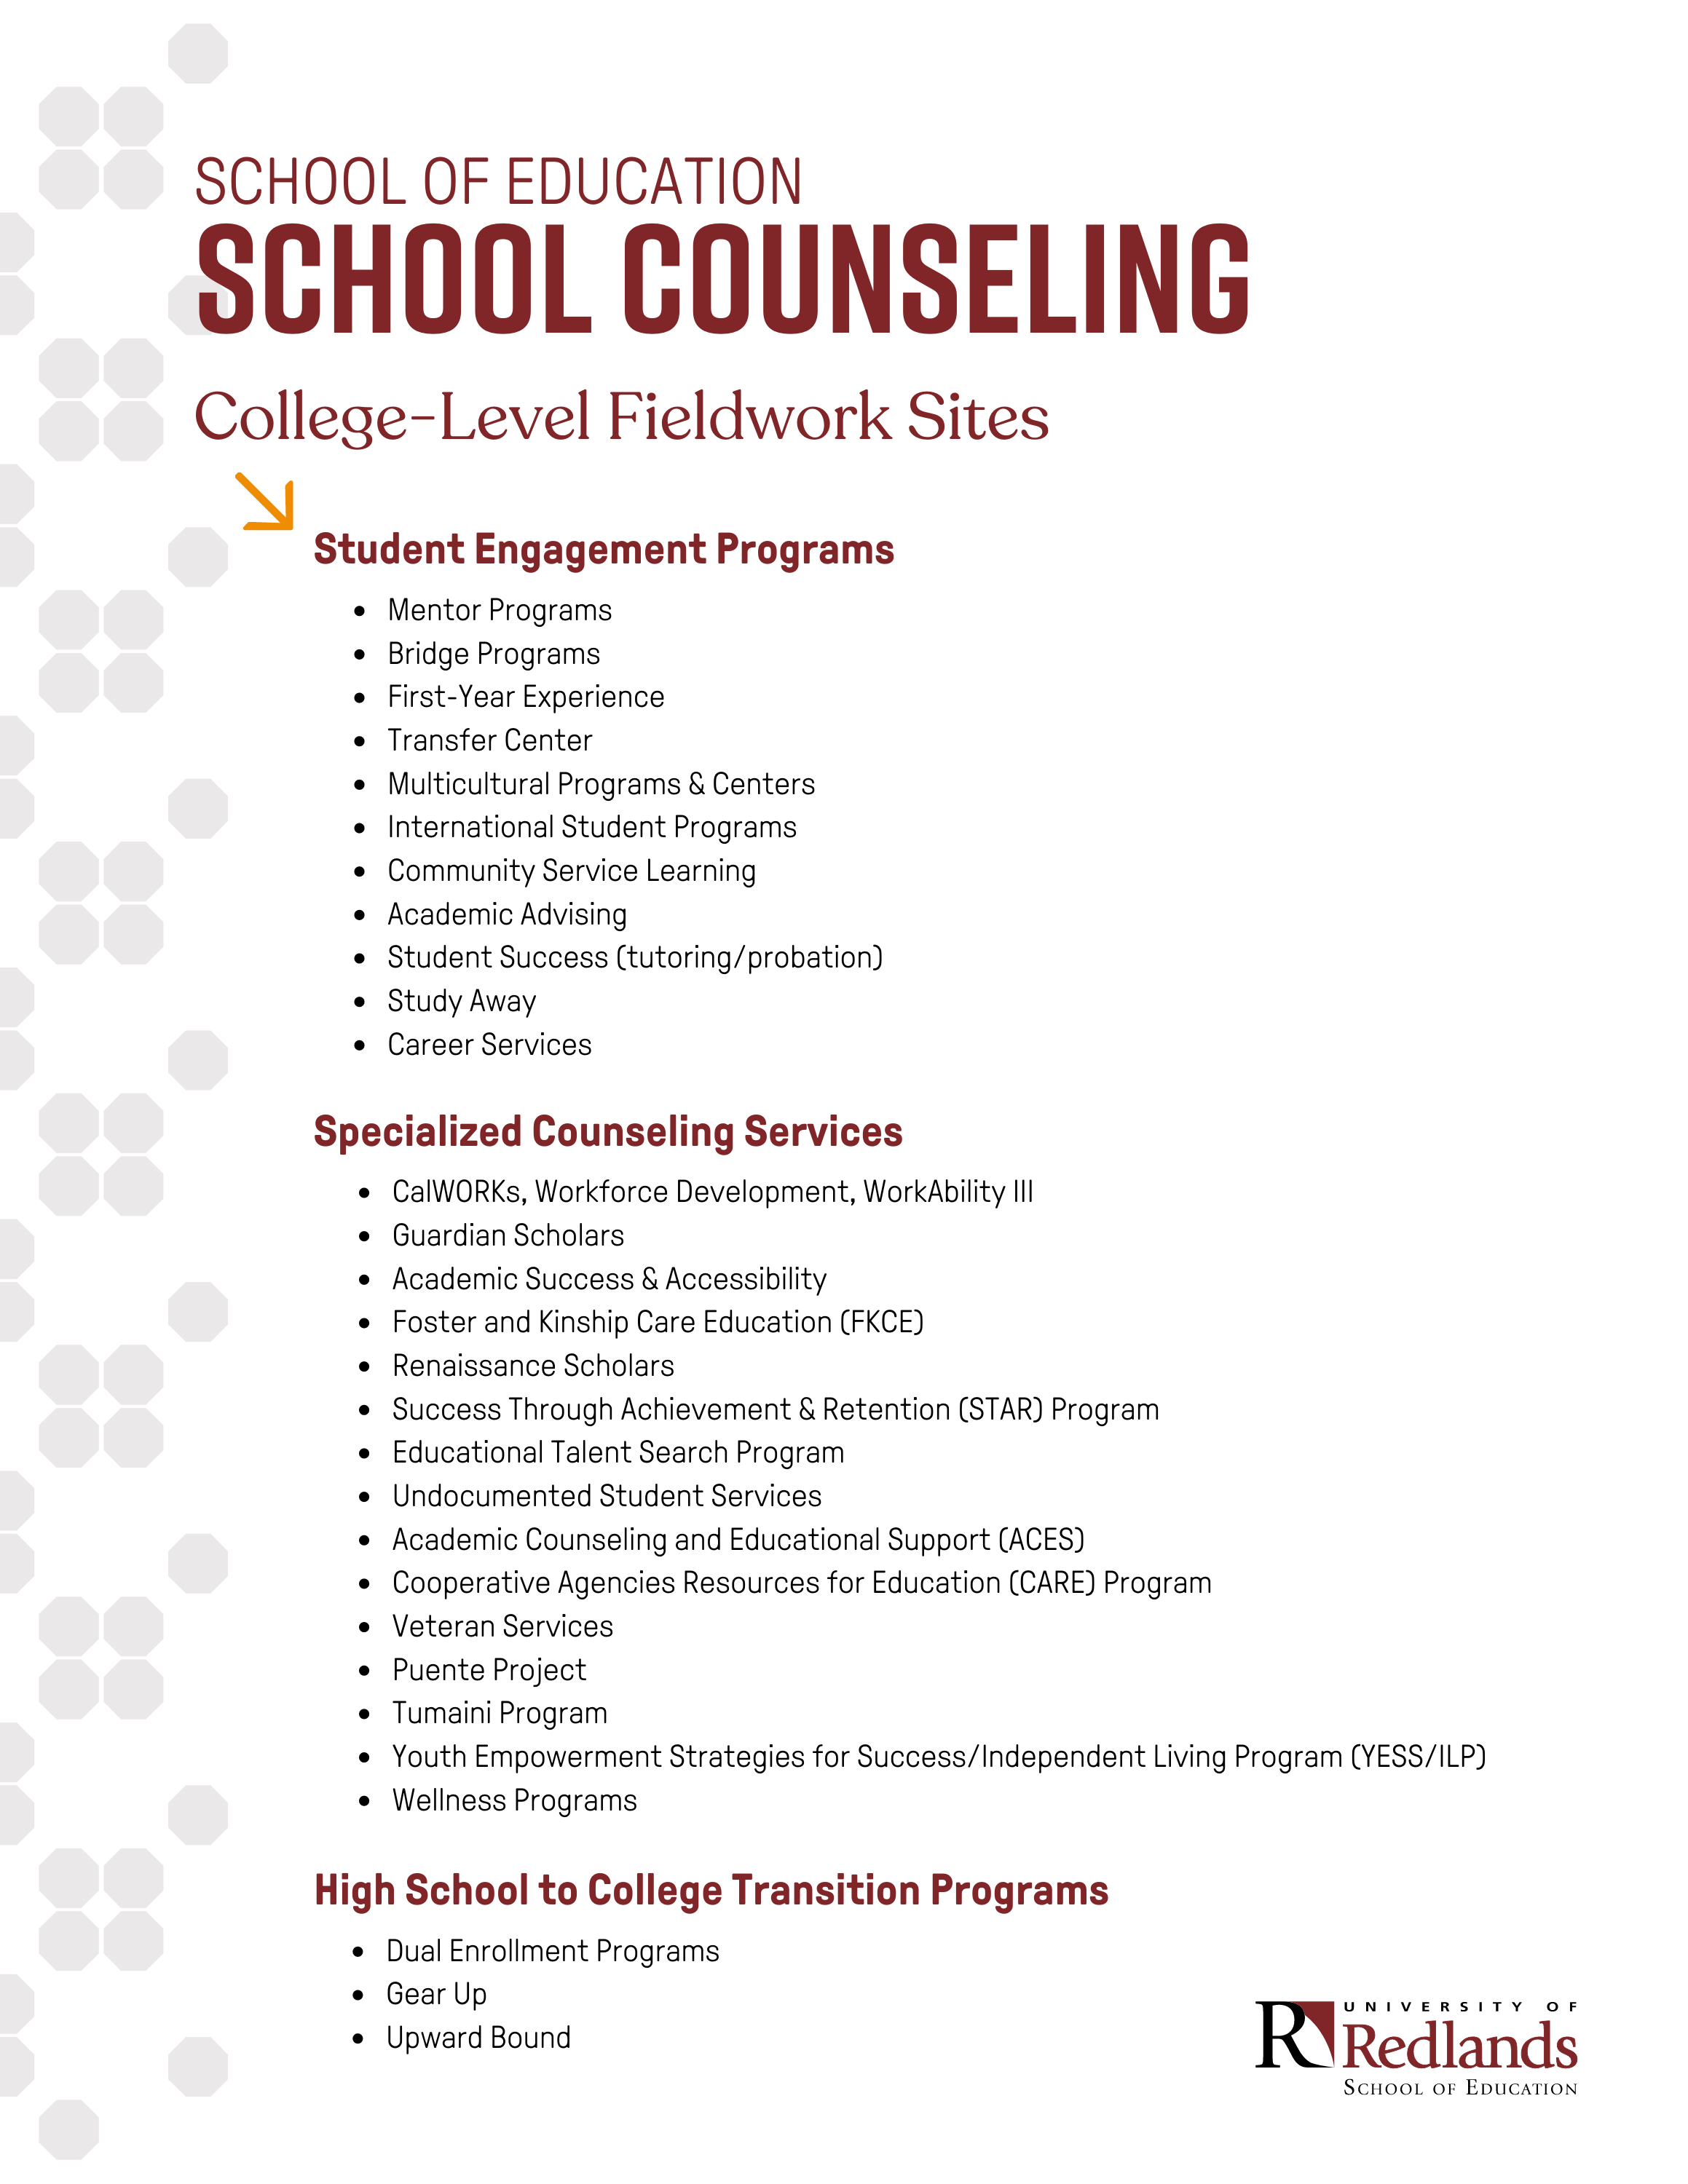 School Counseling College-Level Fieldwork Sites.png